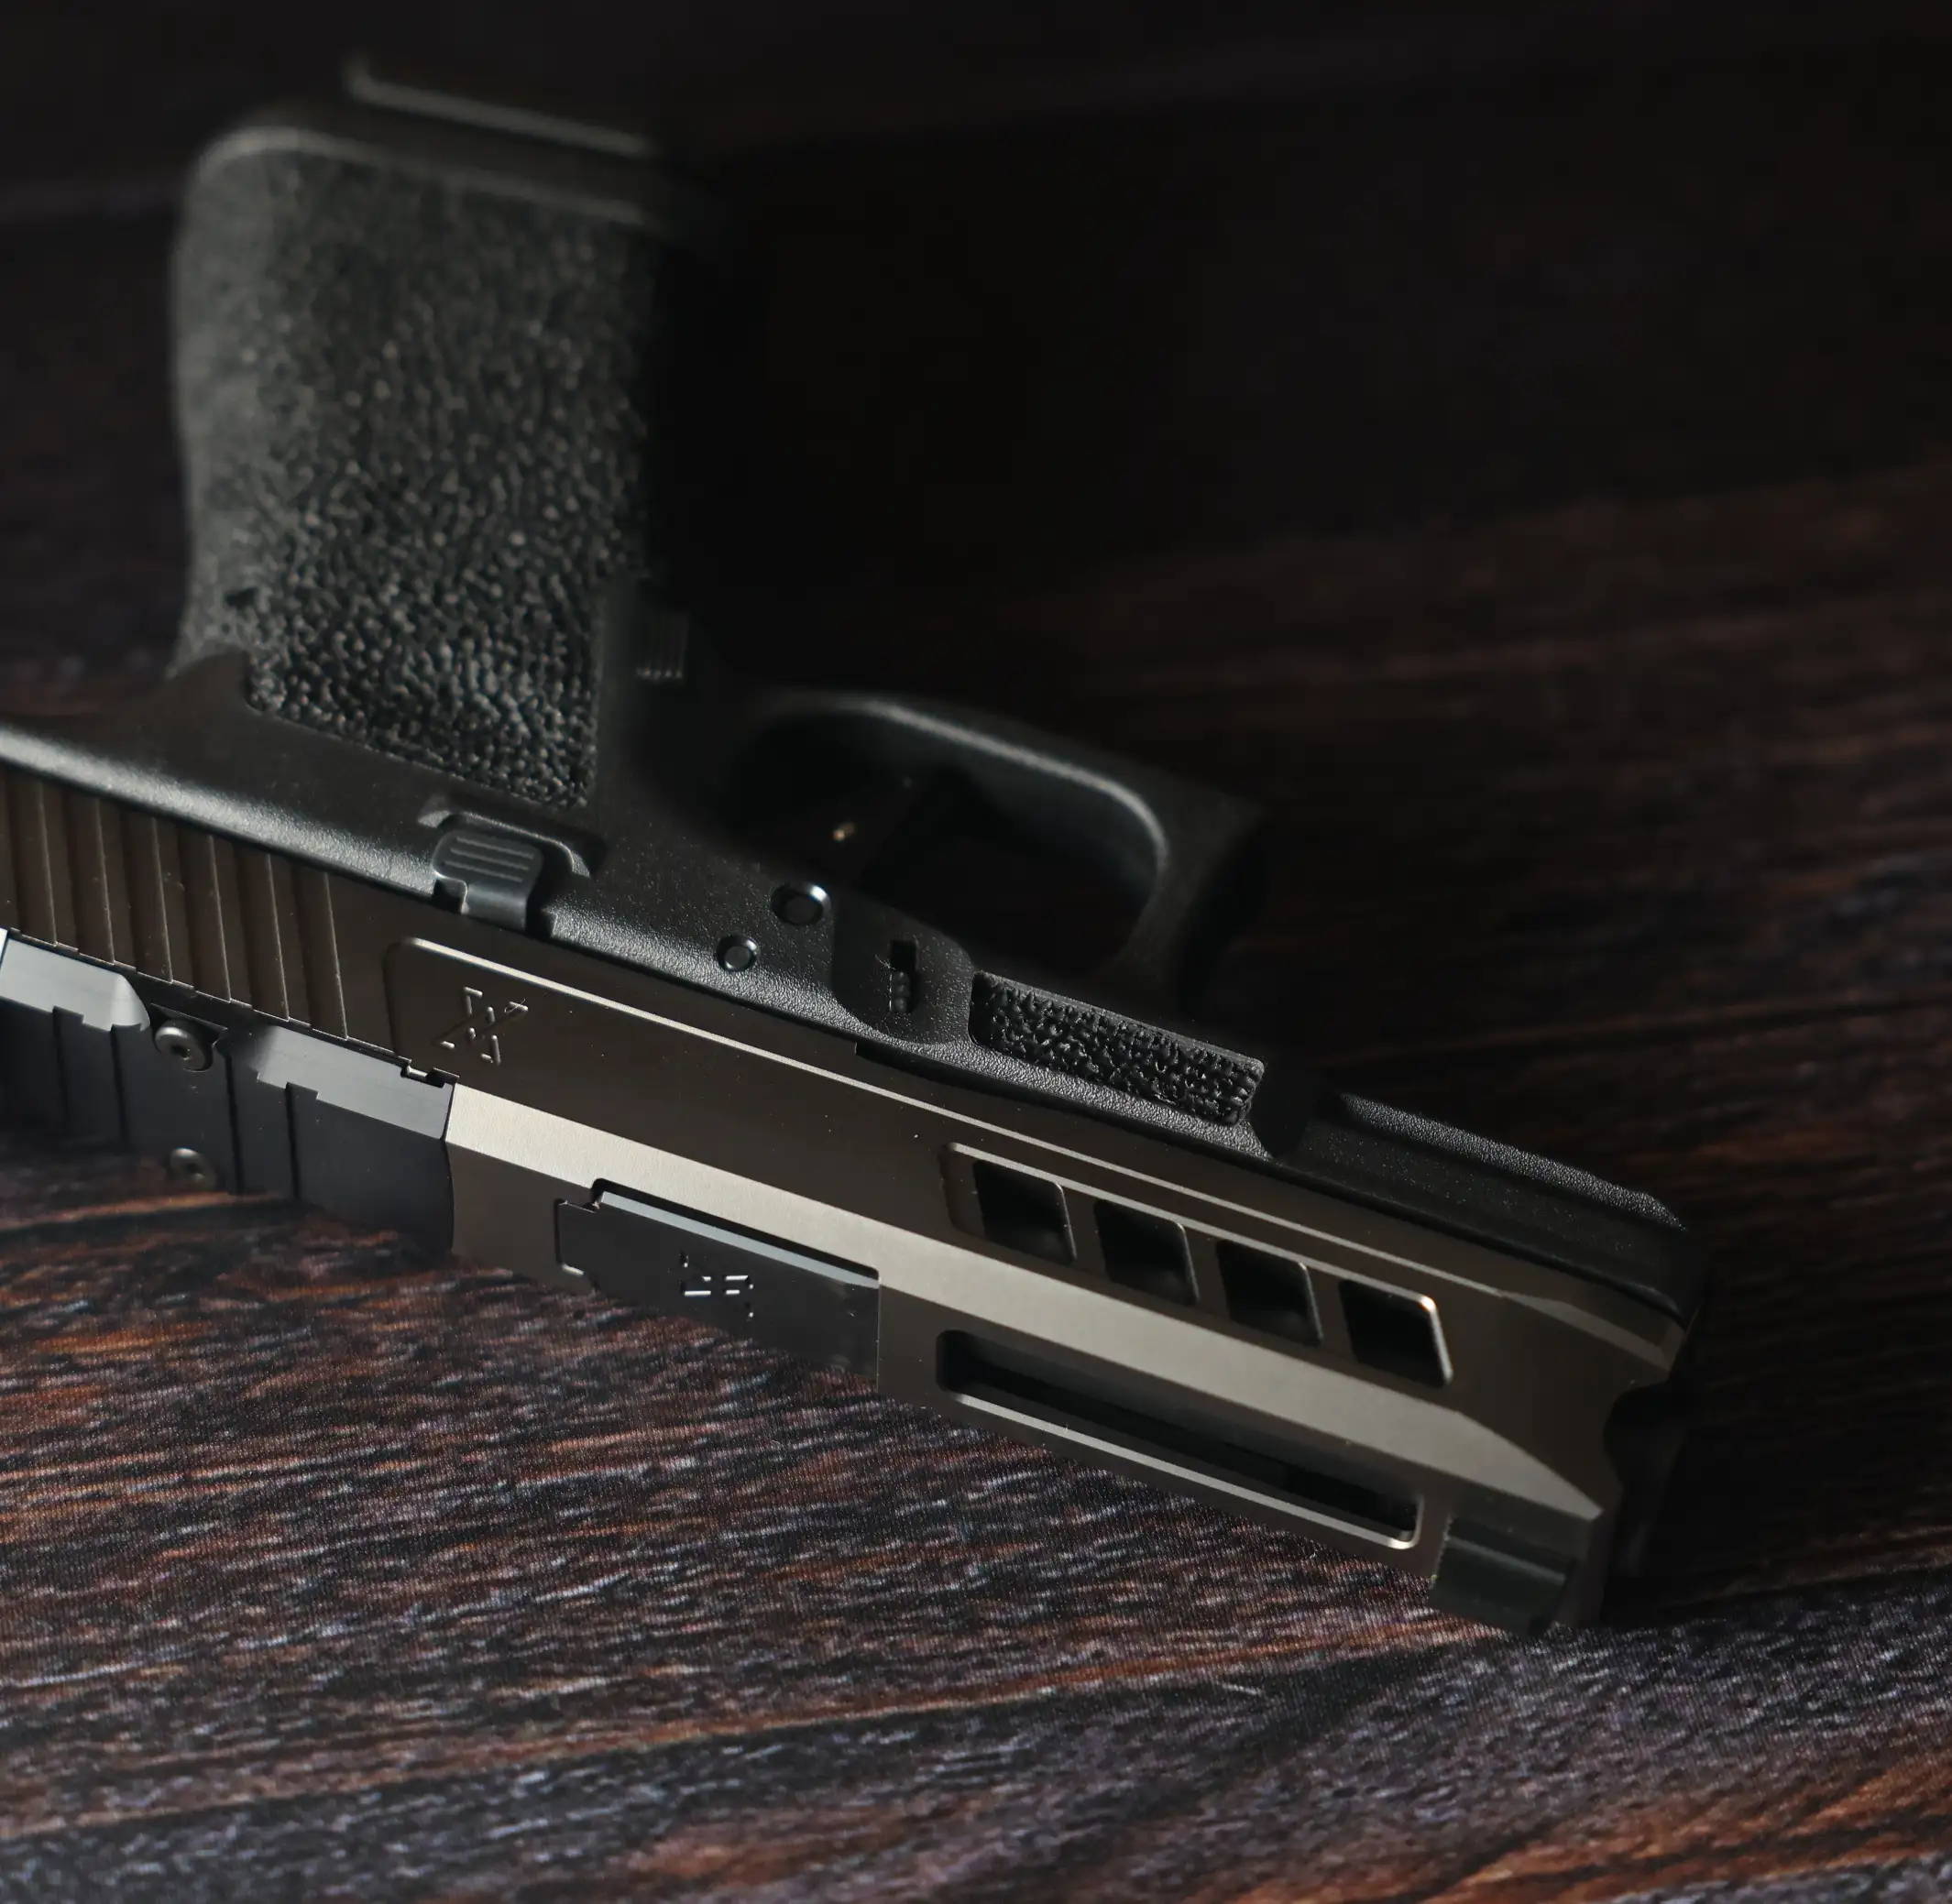 Glock 19 with Grey True Precision Slide and Barrel, and black lower, laying on a wood table.